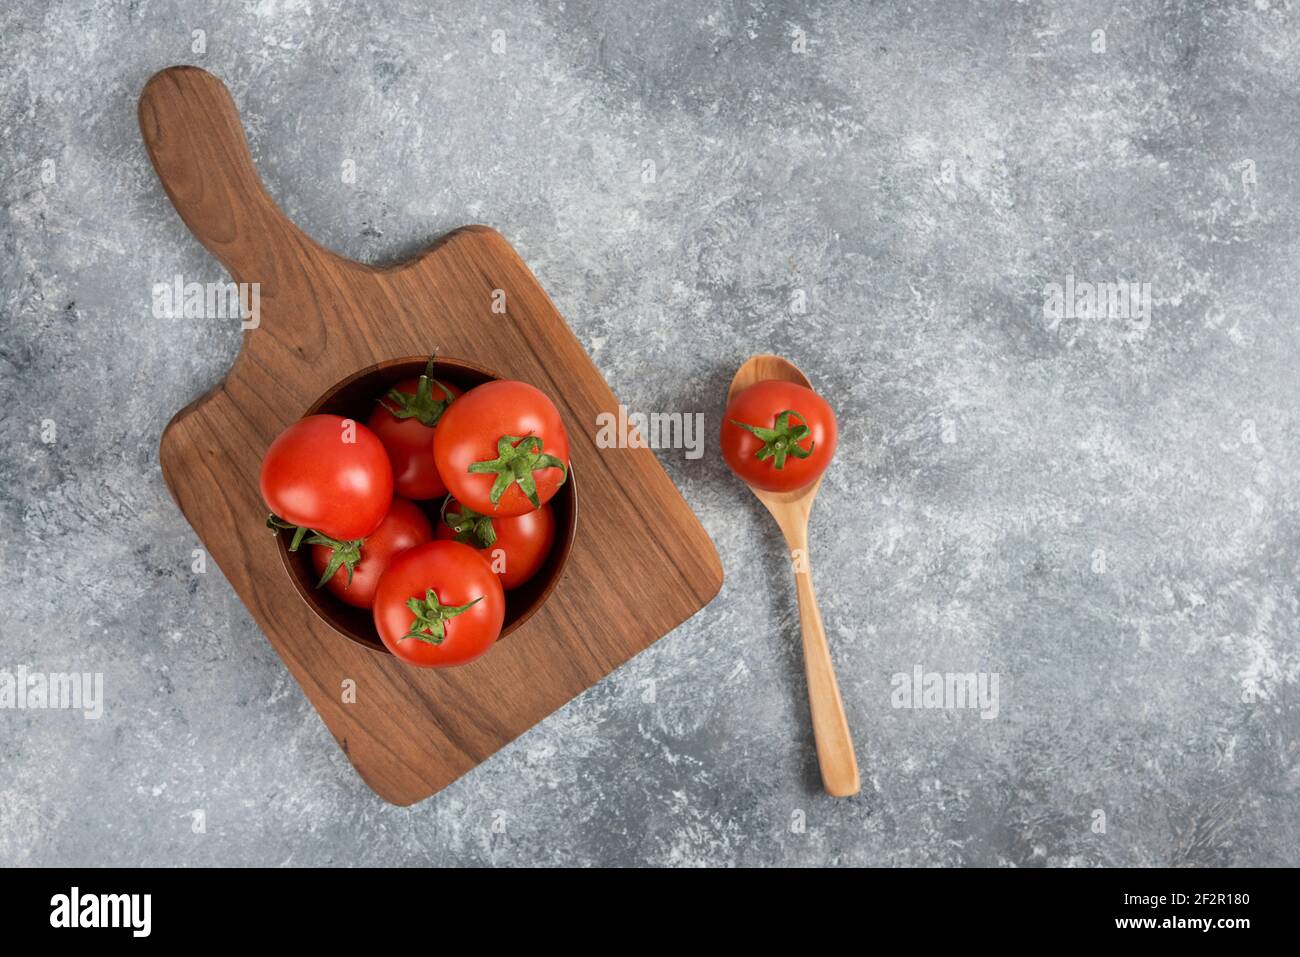 Wooden bowl of red fresh tomatoes on wooden cutting board Stock Photo